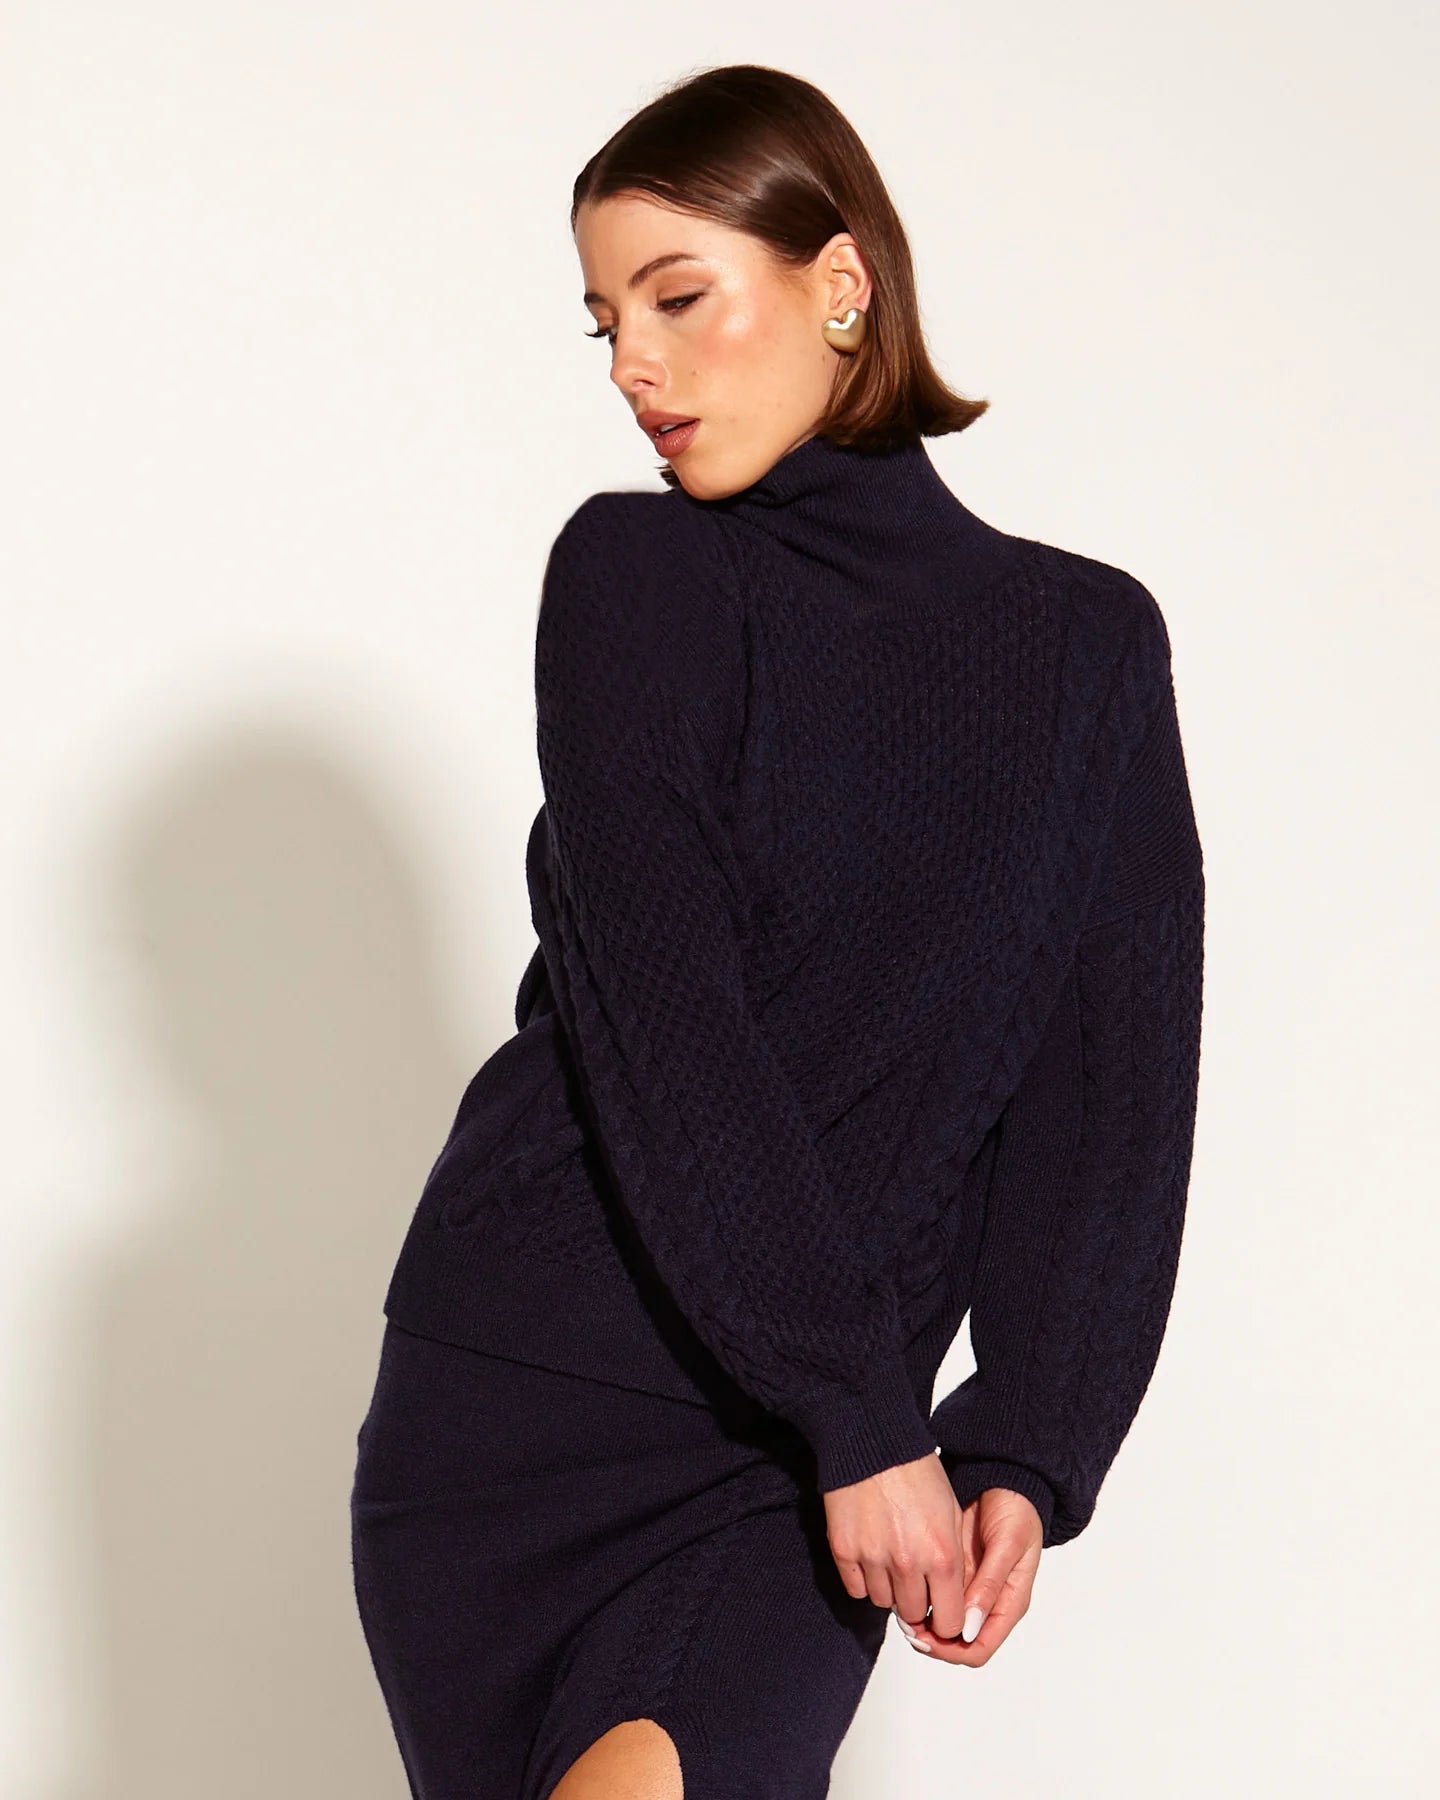 FATE+BECKER TREASURE TURTLENECK CABLE KNIT NAVY